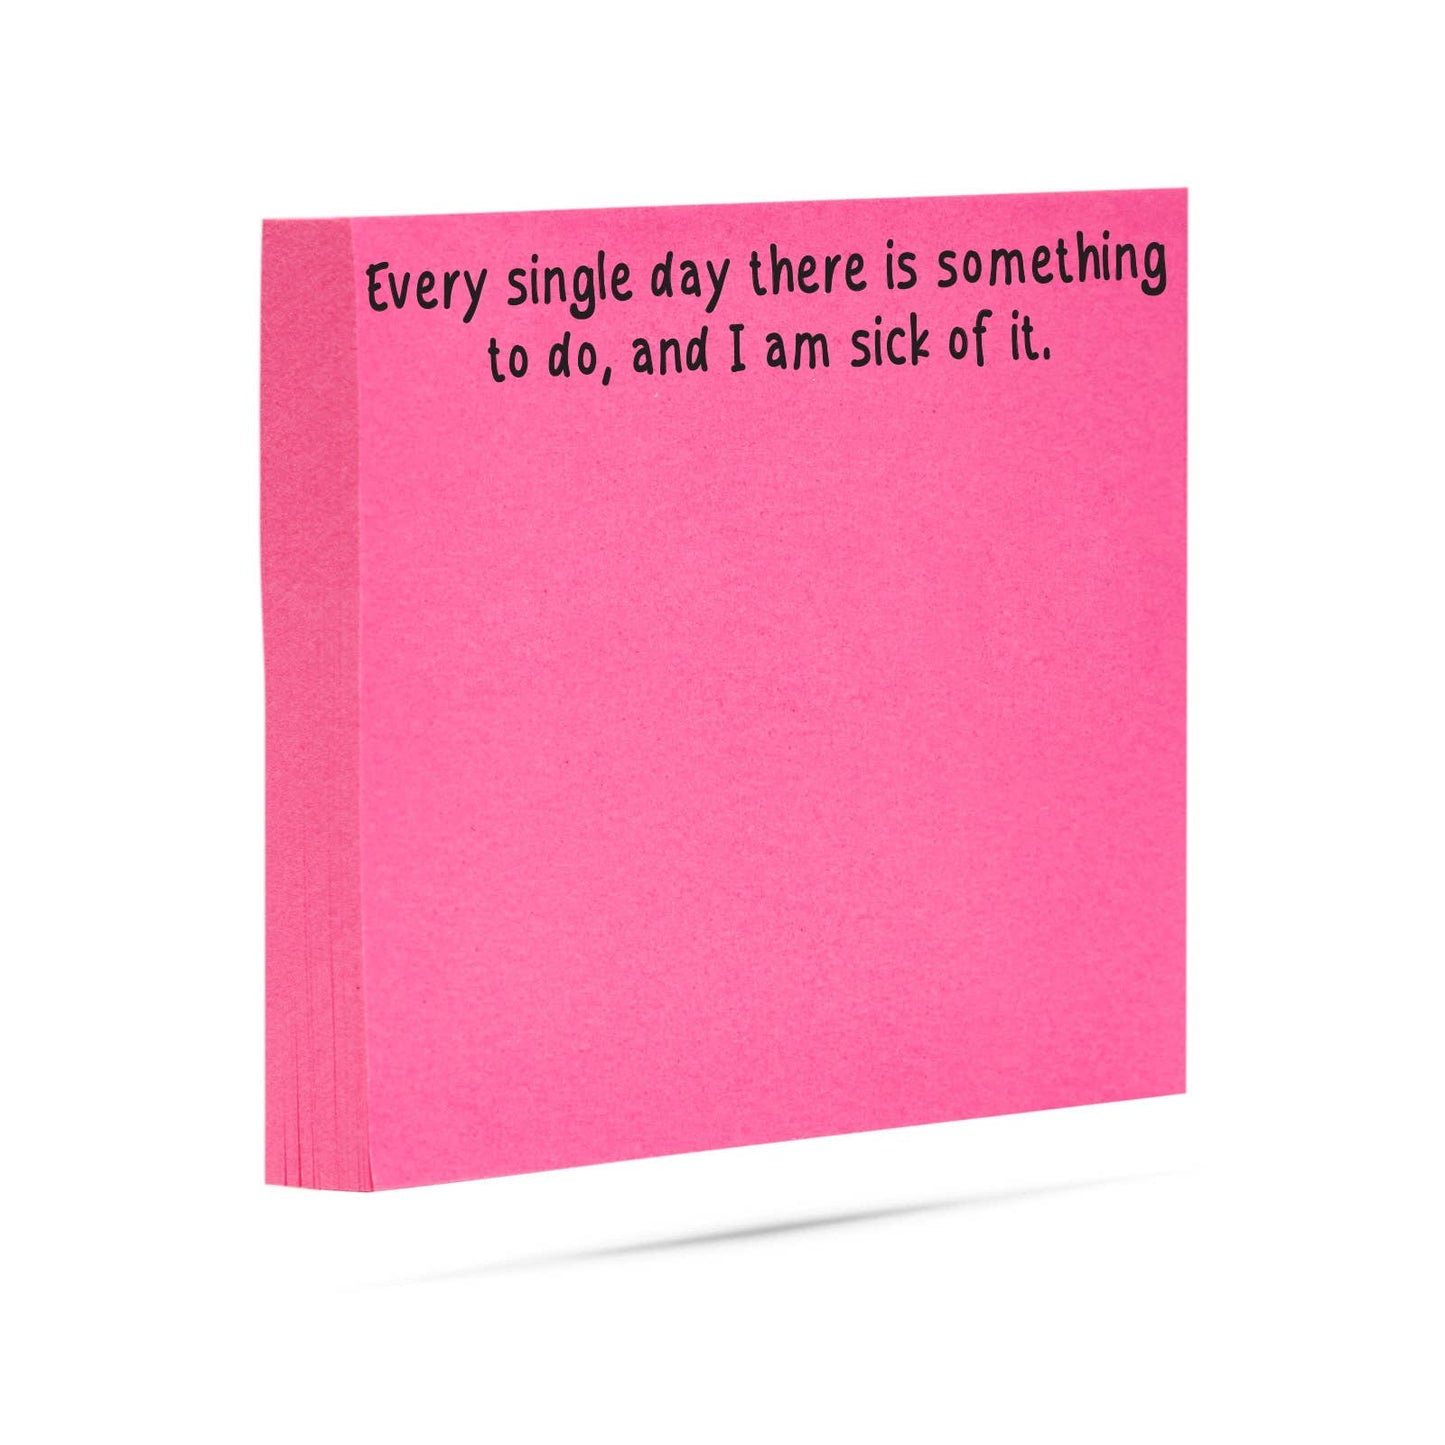 Every single day there is - Sticky Notes